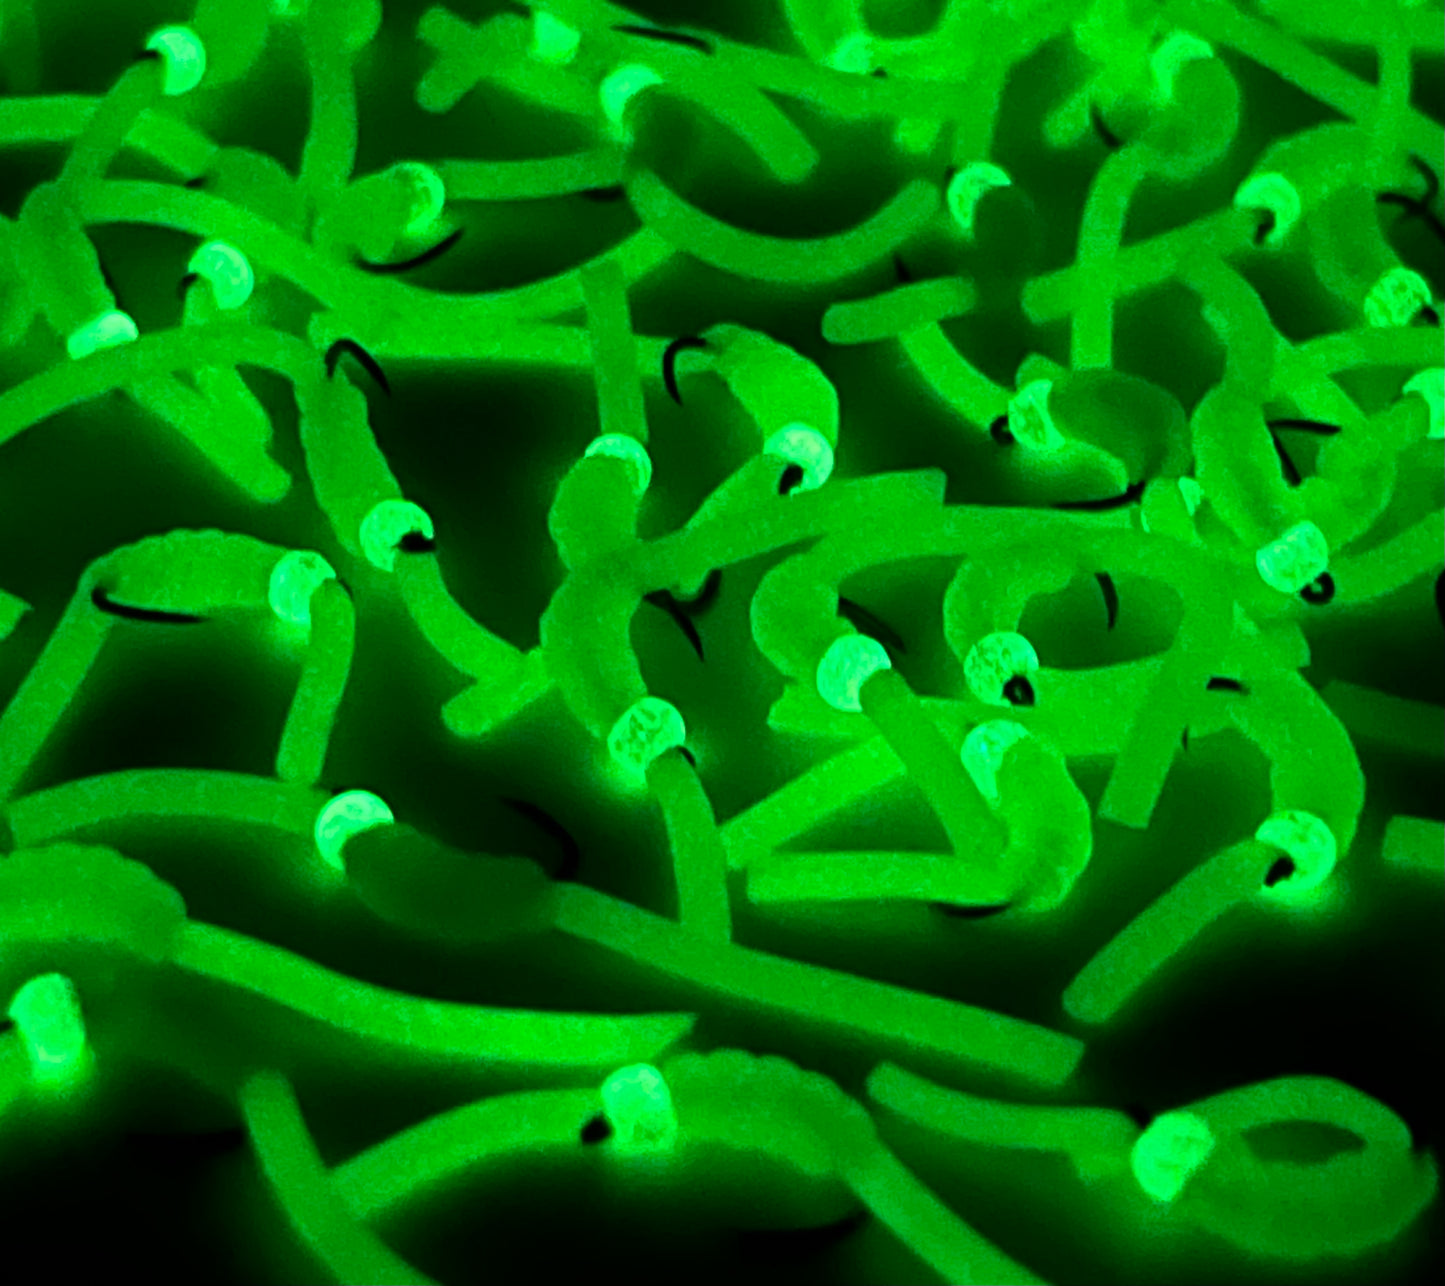 Glow in the dark squirmies